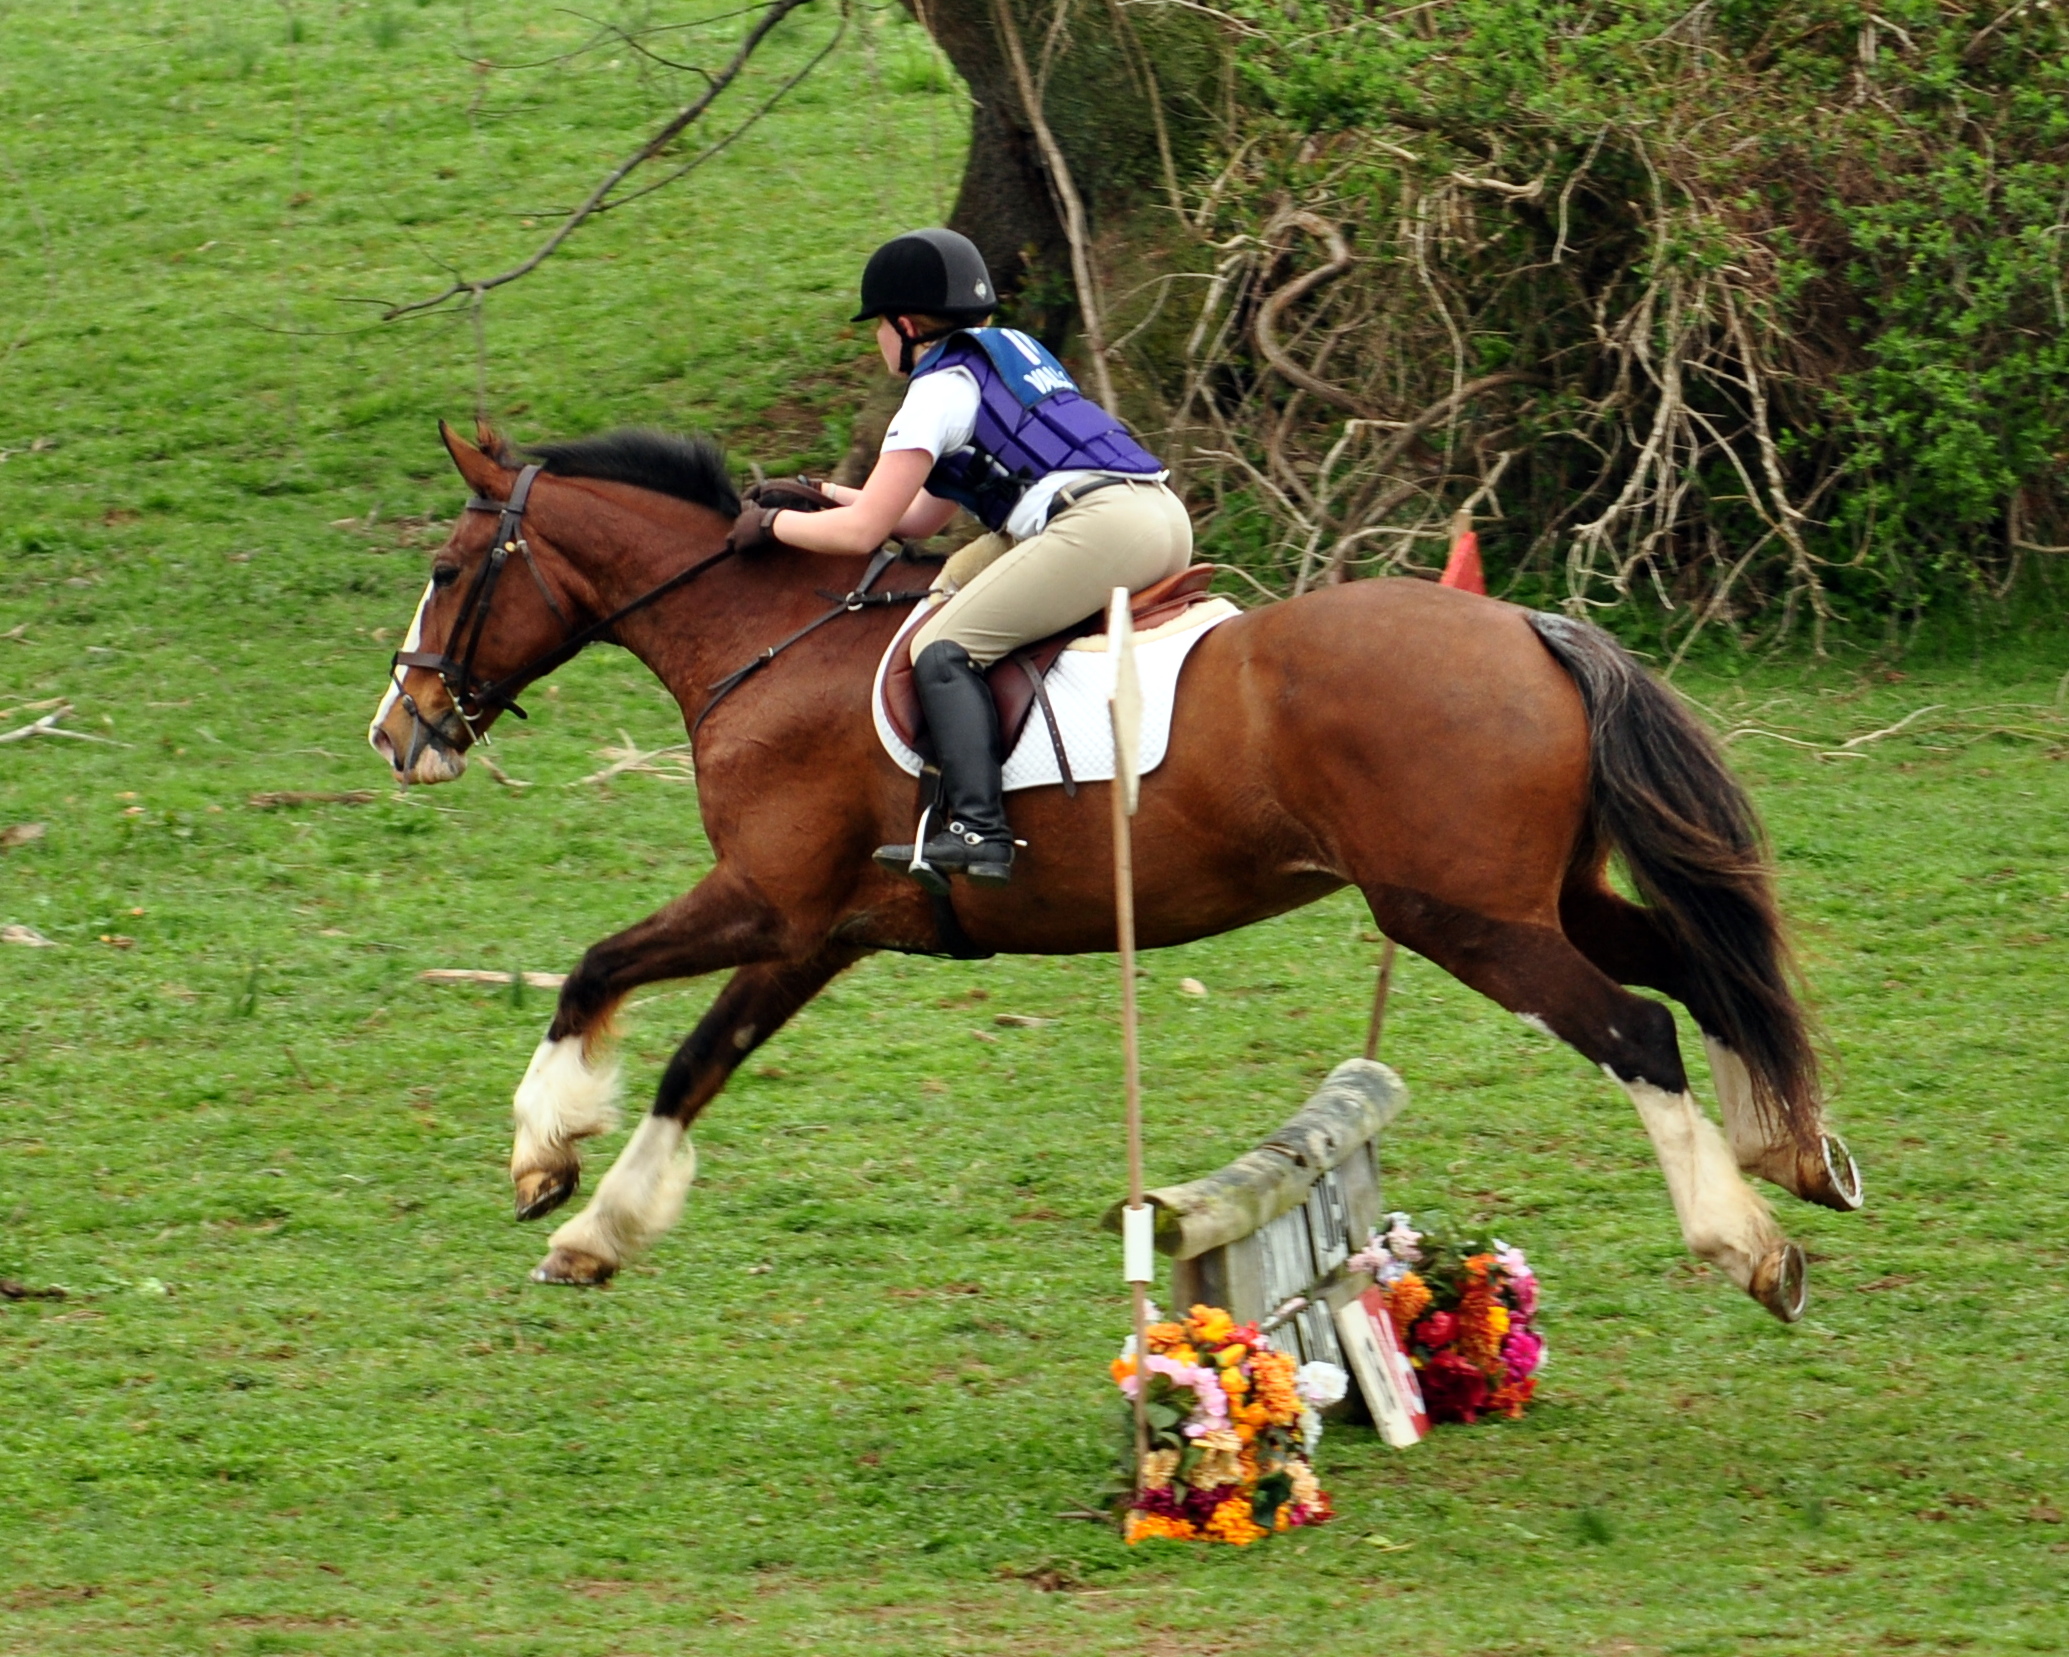 a person in a helmet jumping a horse over obstacles